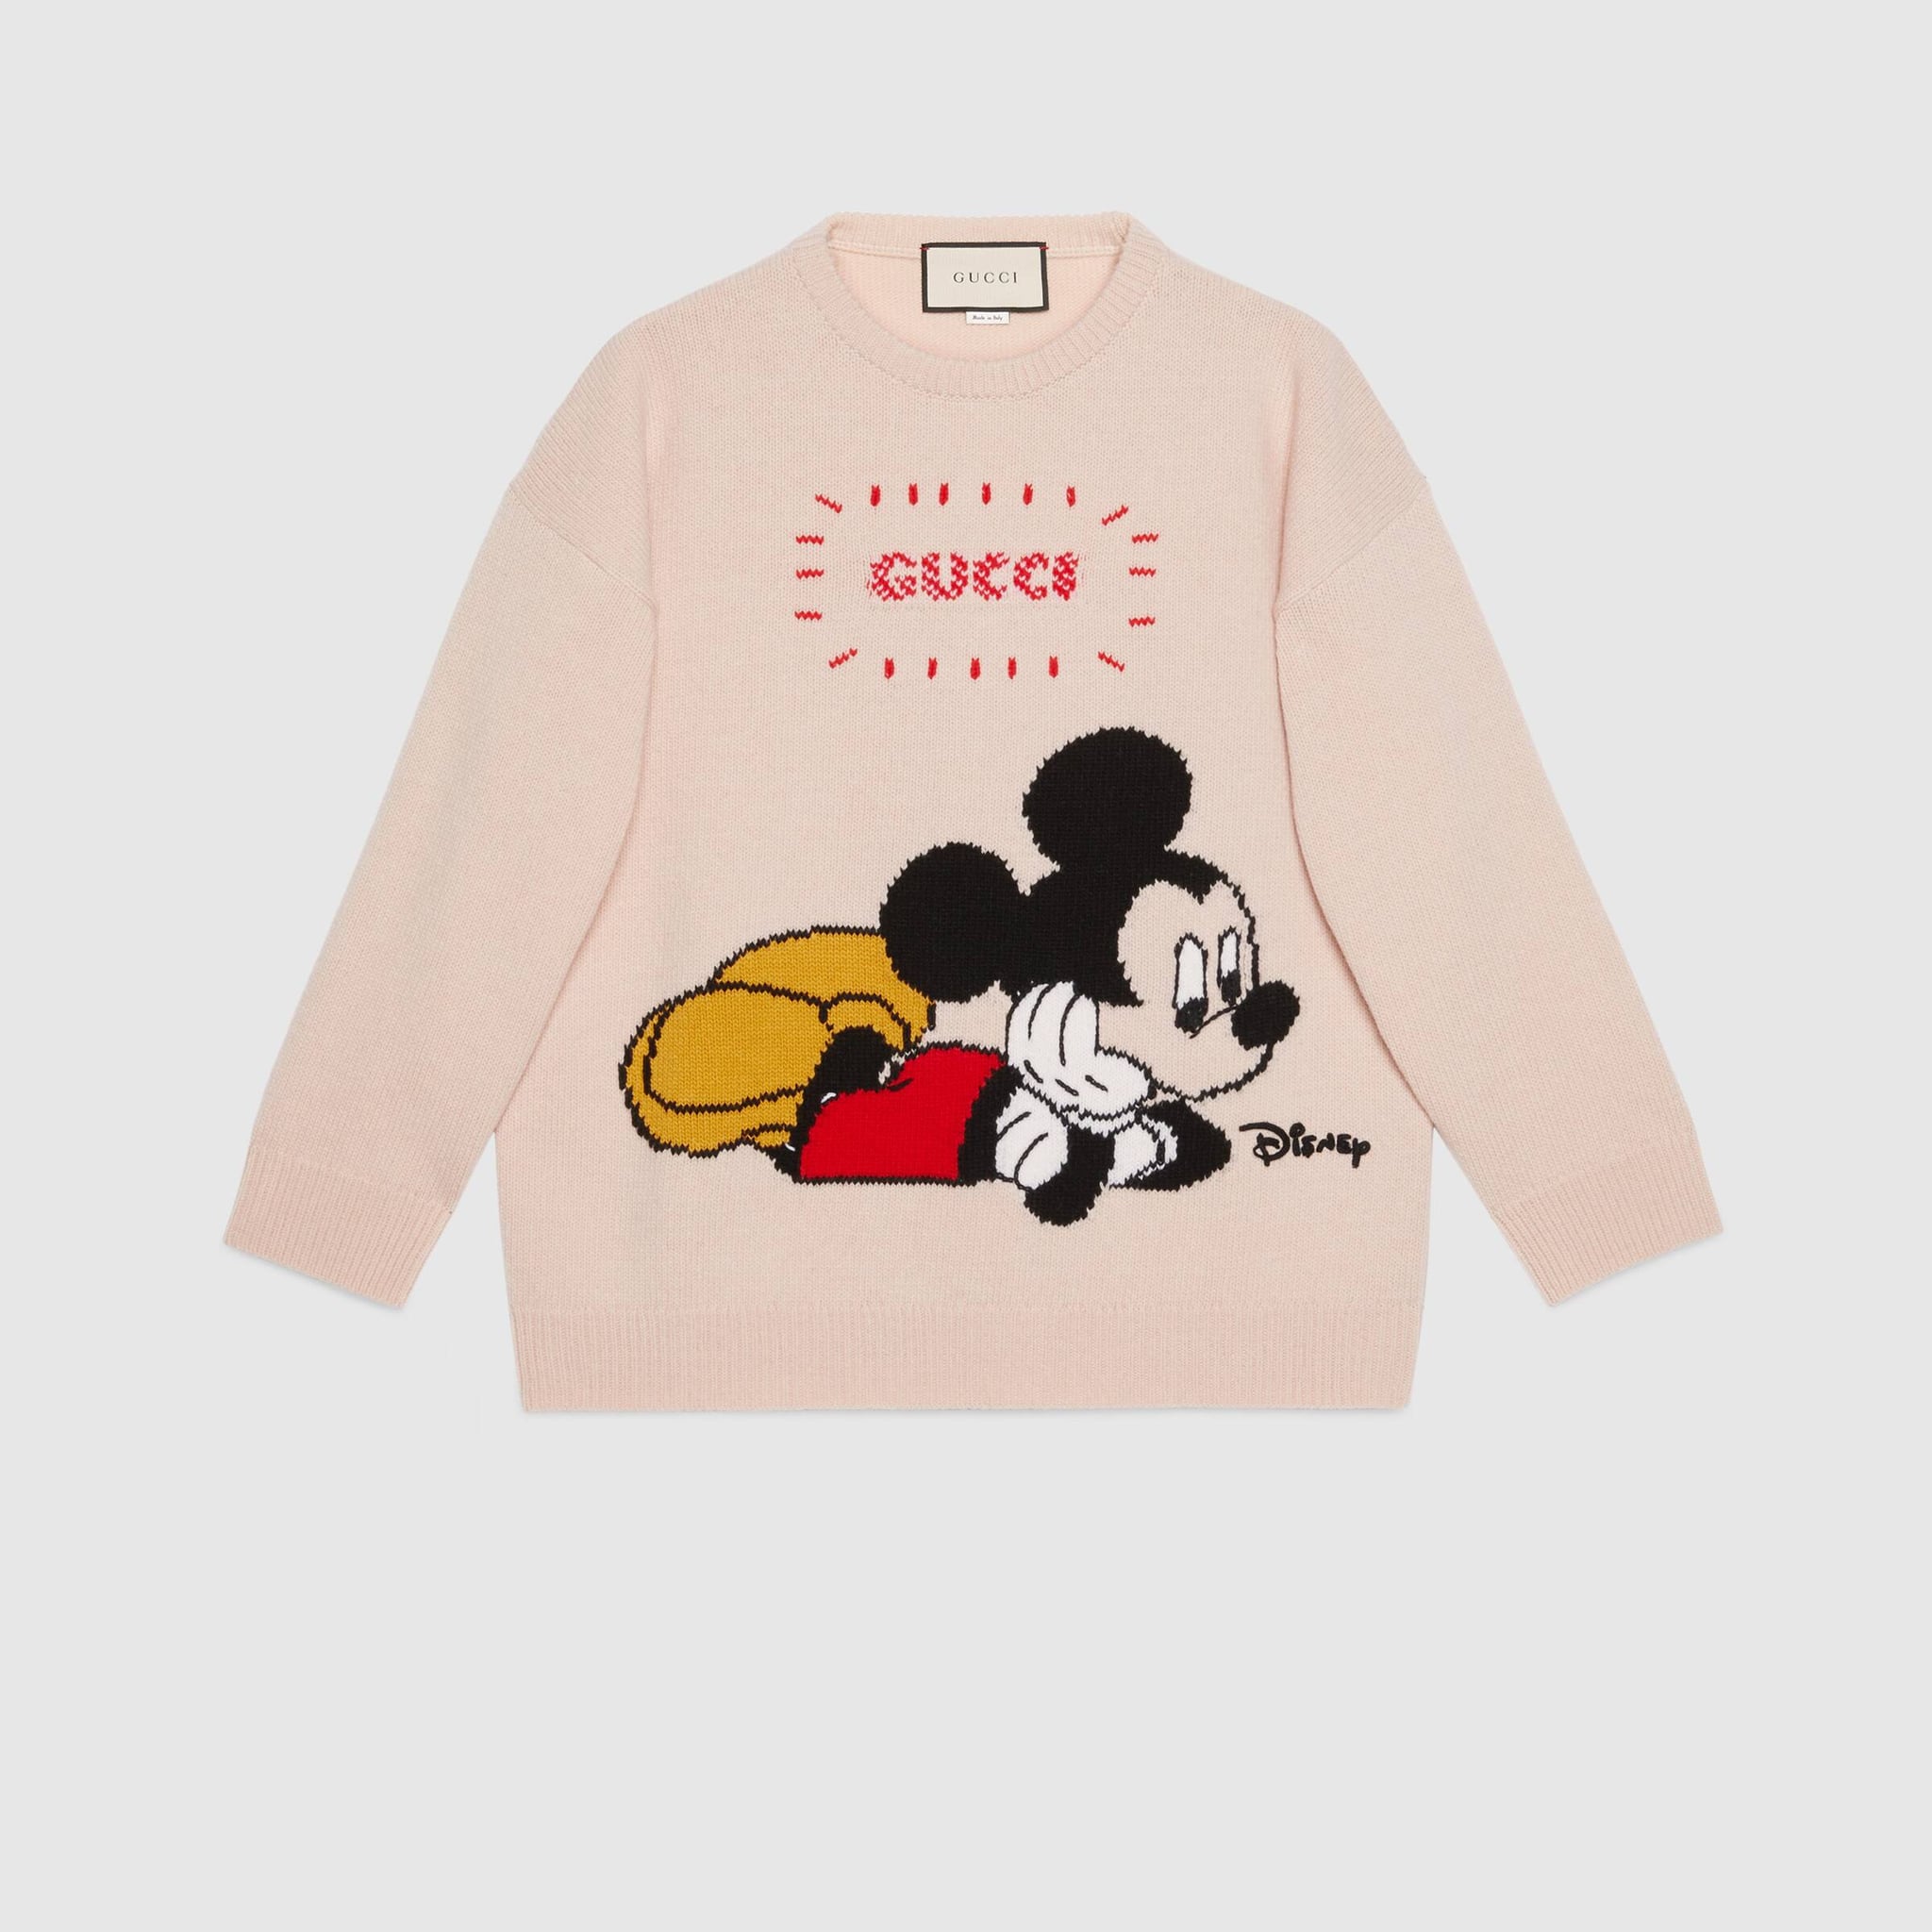 gucci mickey mouse top